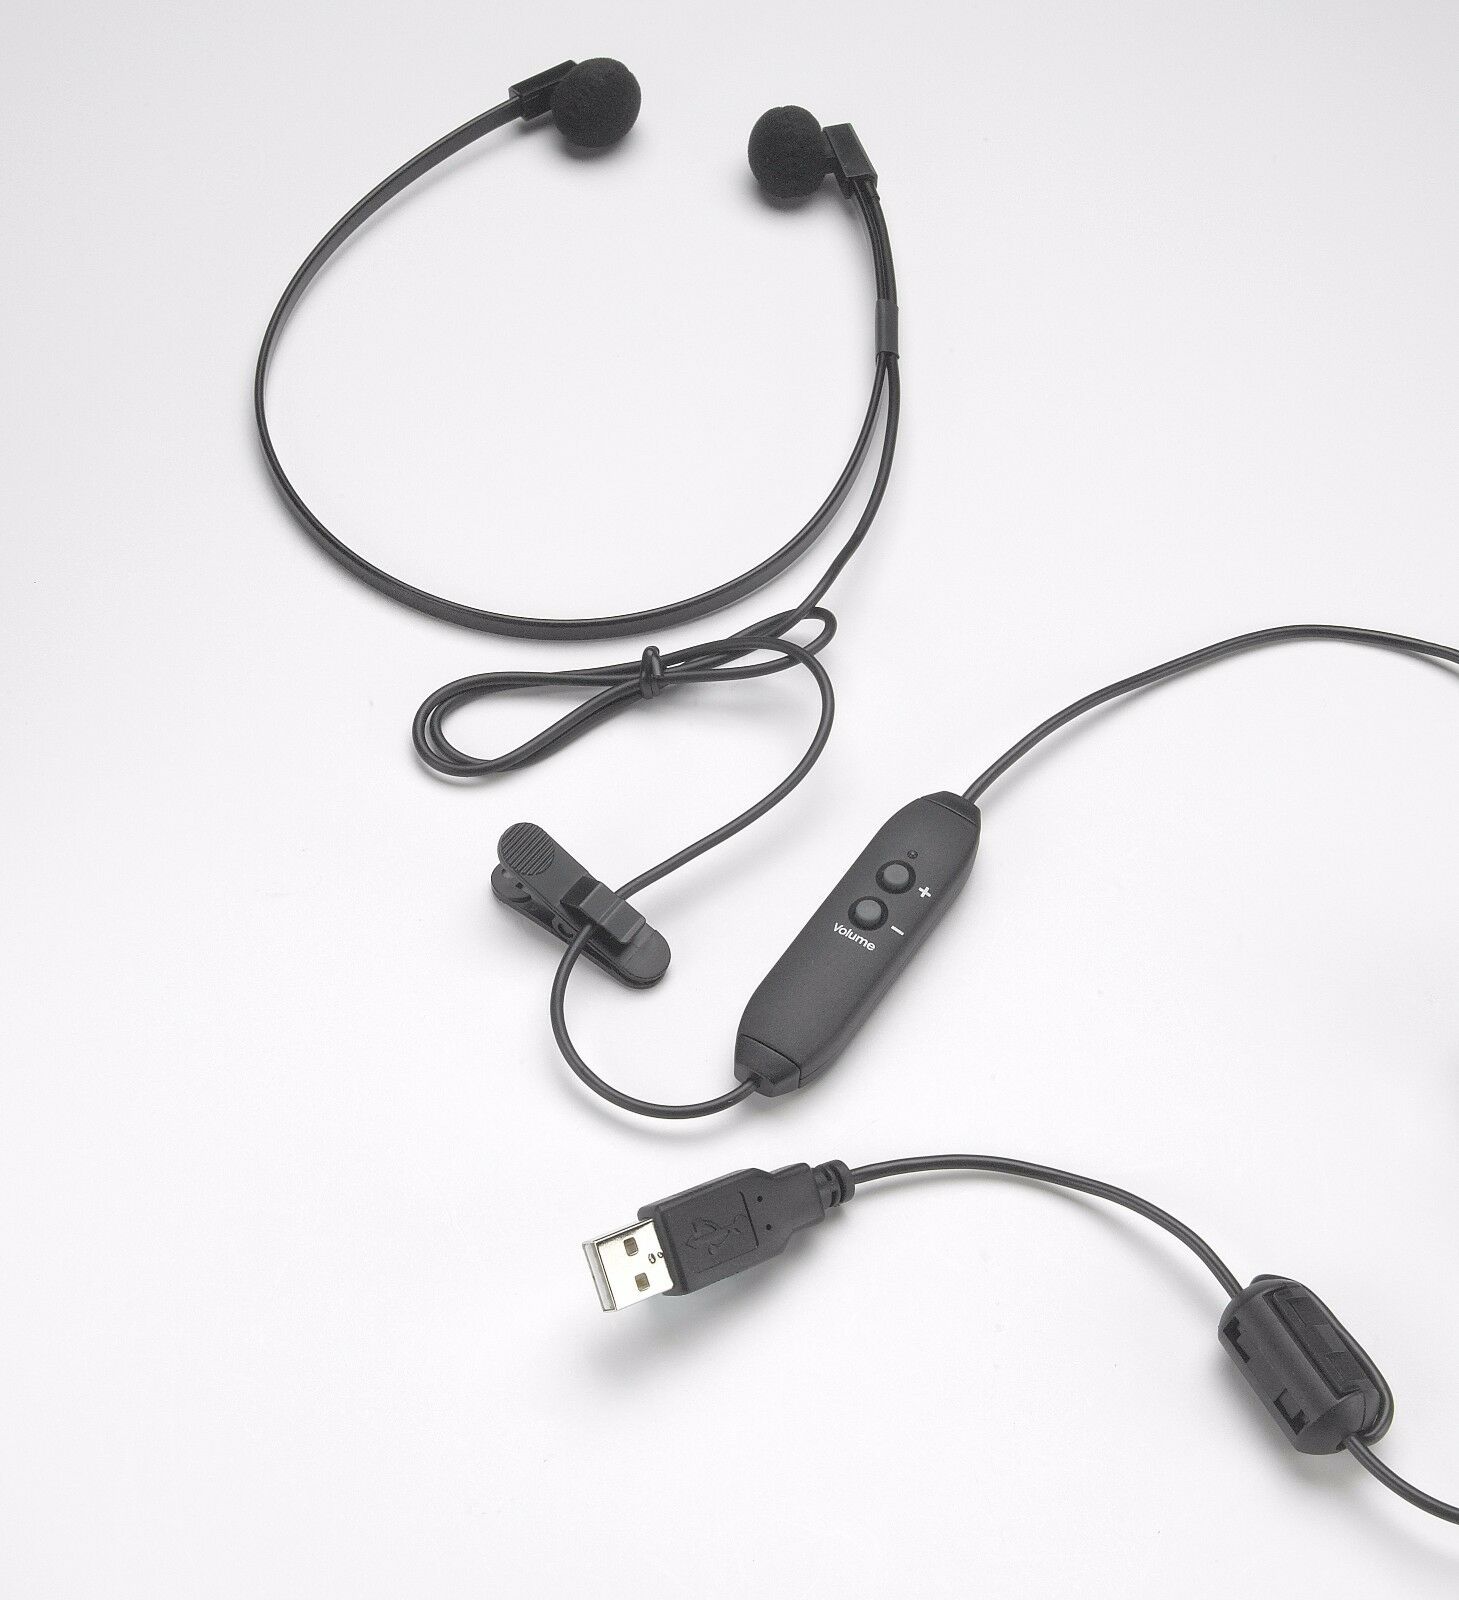 Spectra Usb Transcription Headset With In Line Volume Control